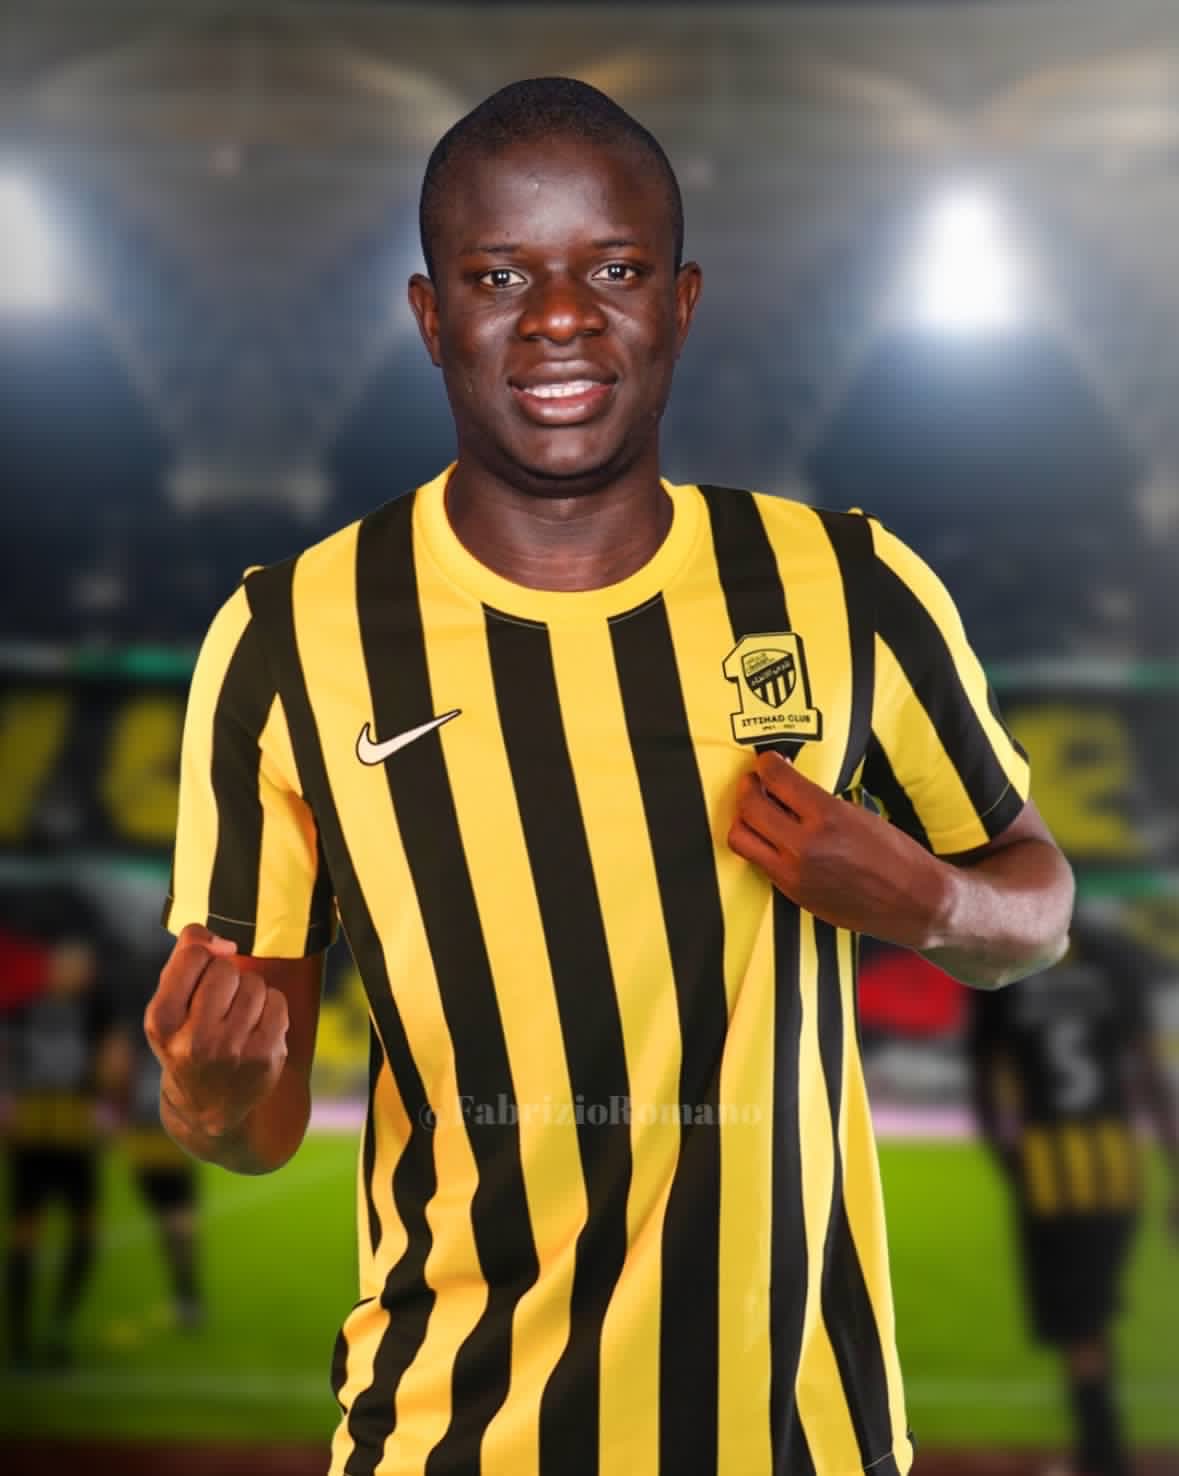 N’GOLO KANTE SIGNS FOR Al ITTIHAD ON A TWO-YEAR DEAL